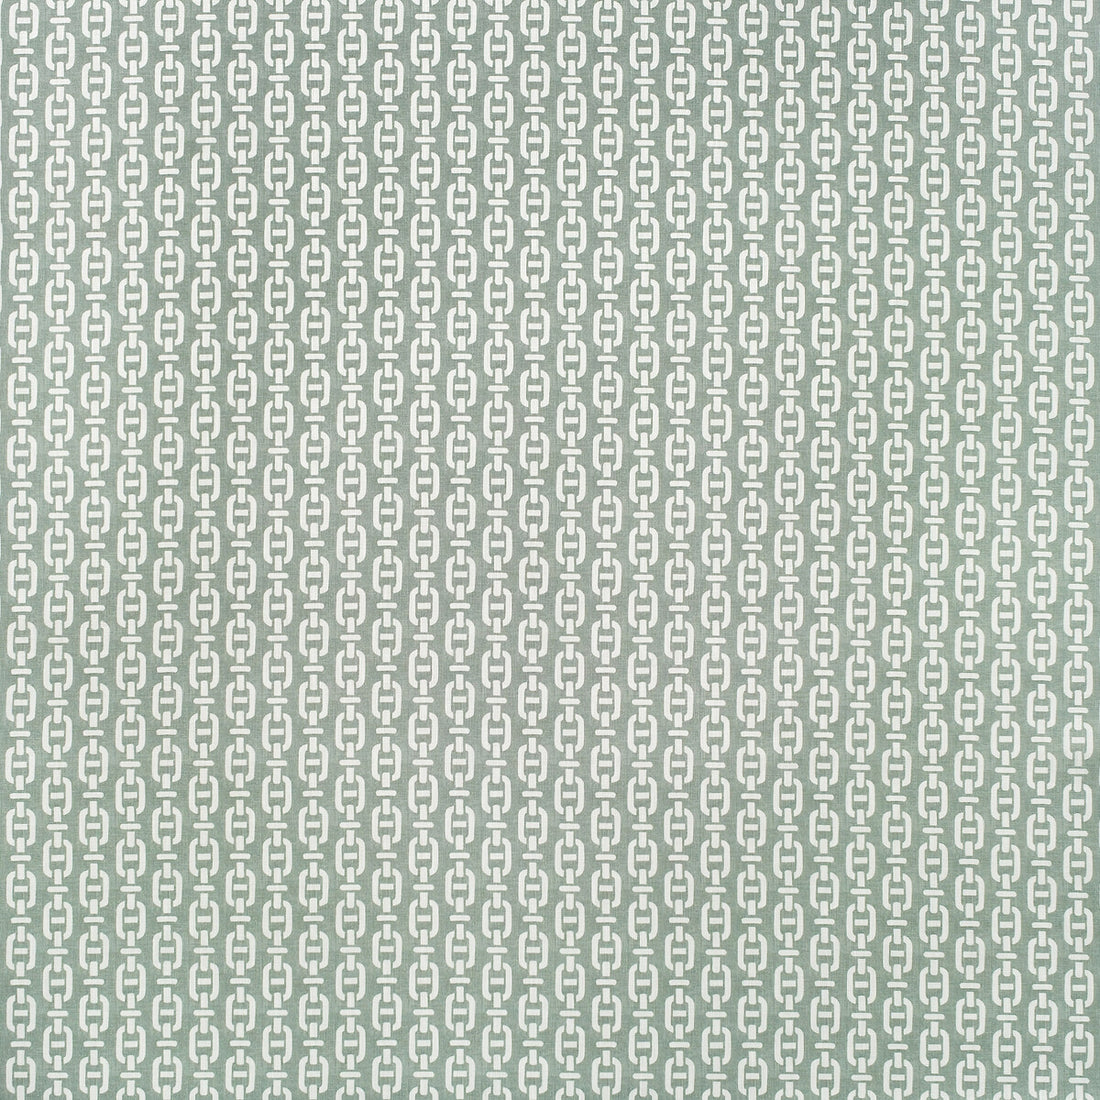 Burlington Outdoor fabric in celadon color - pattern AM100387.315.0 - by Kravet Couture in the Andrew Martin Sophie Patterson Outdoor collection